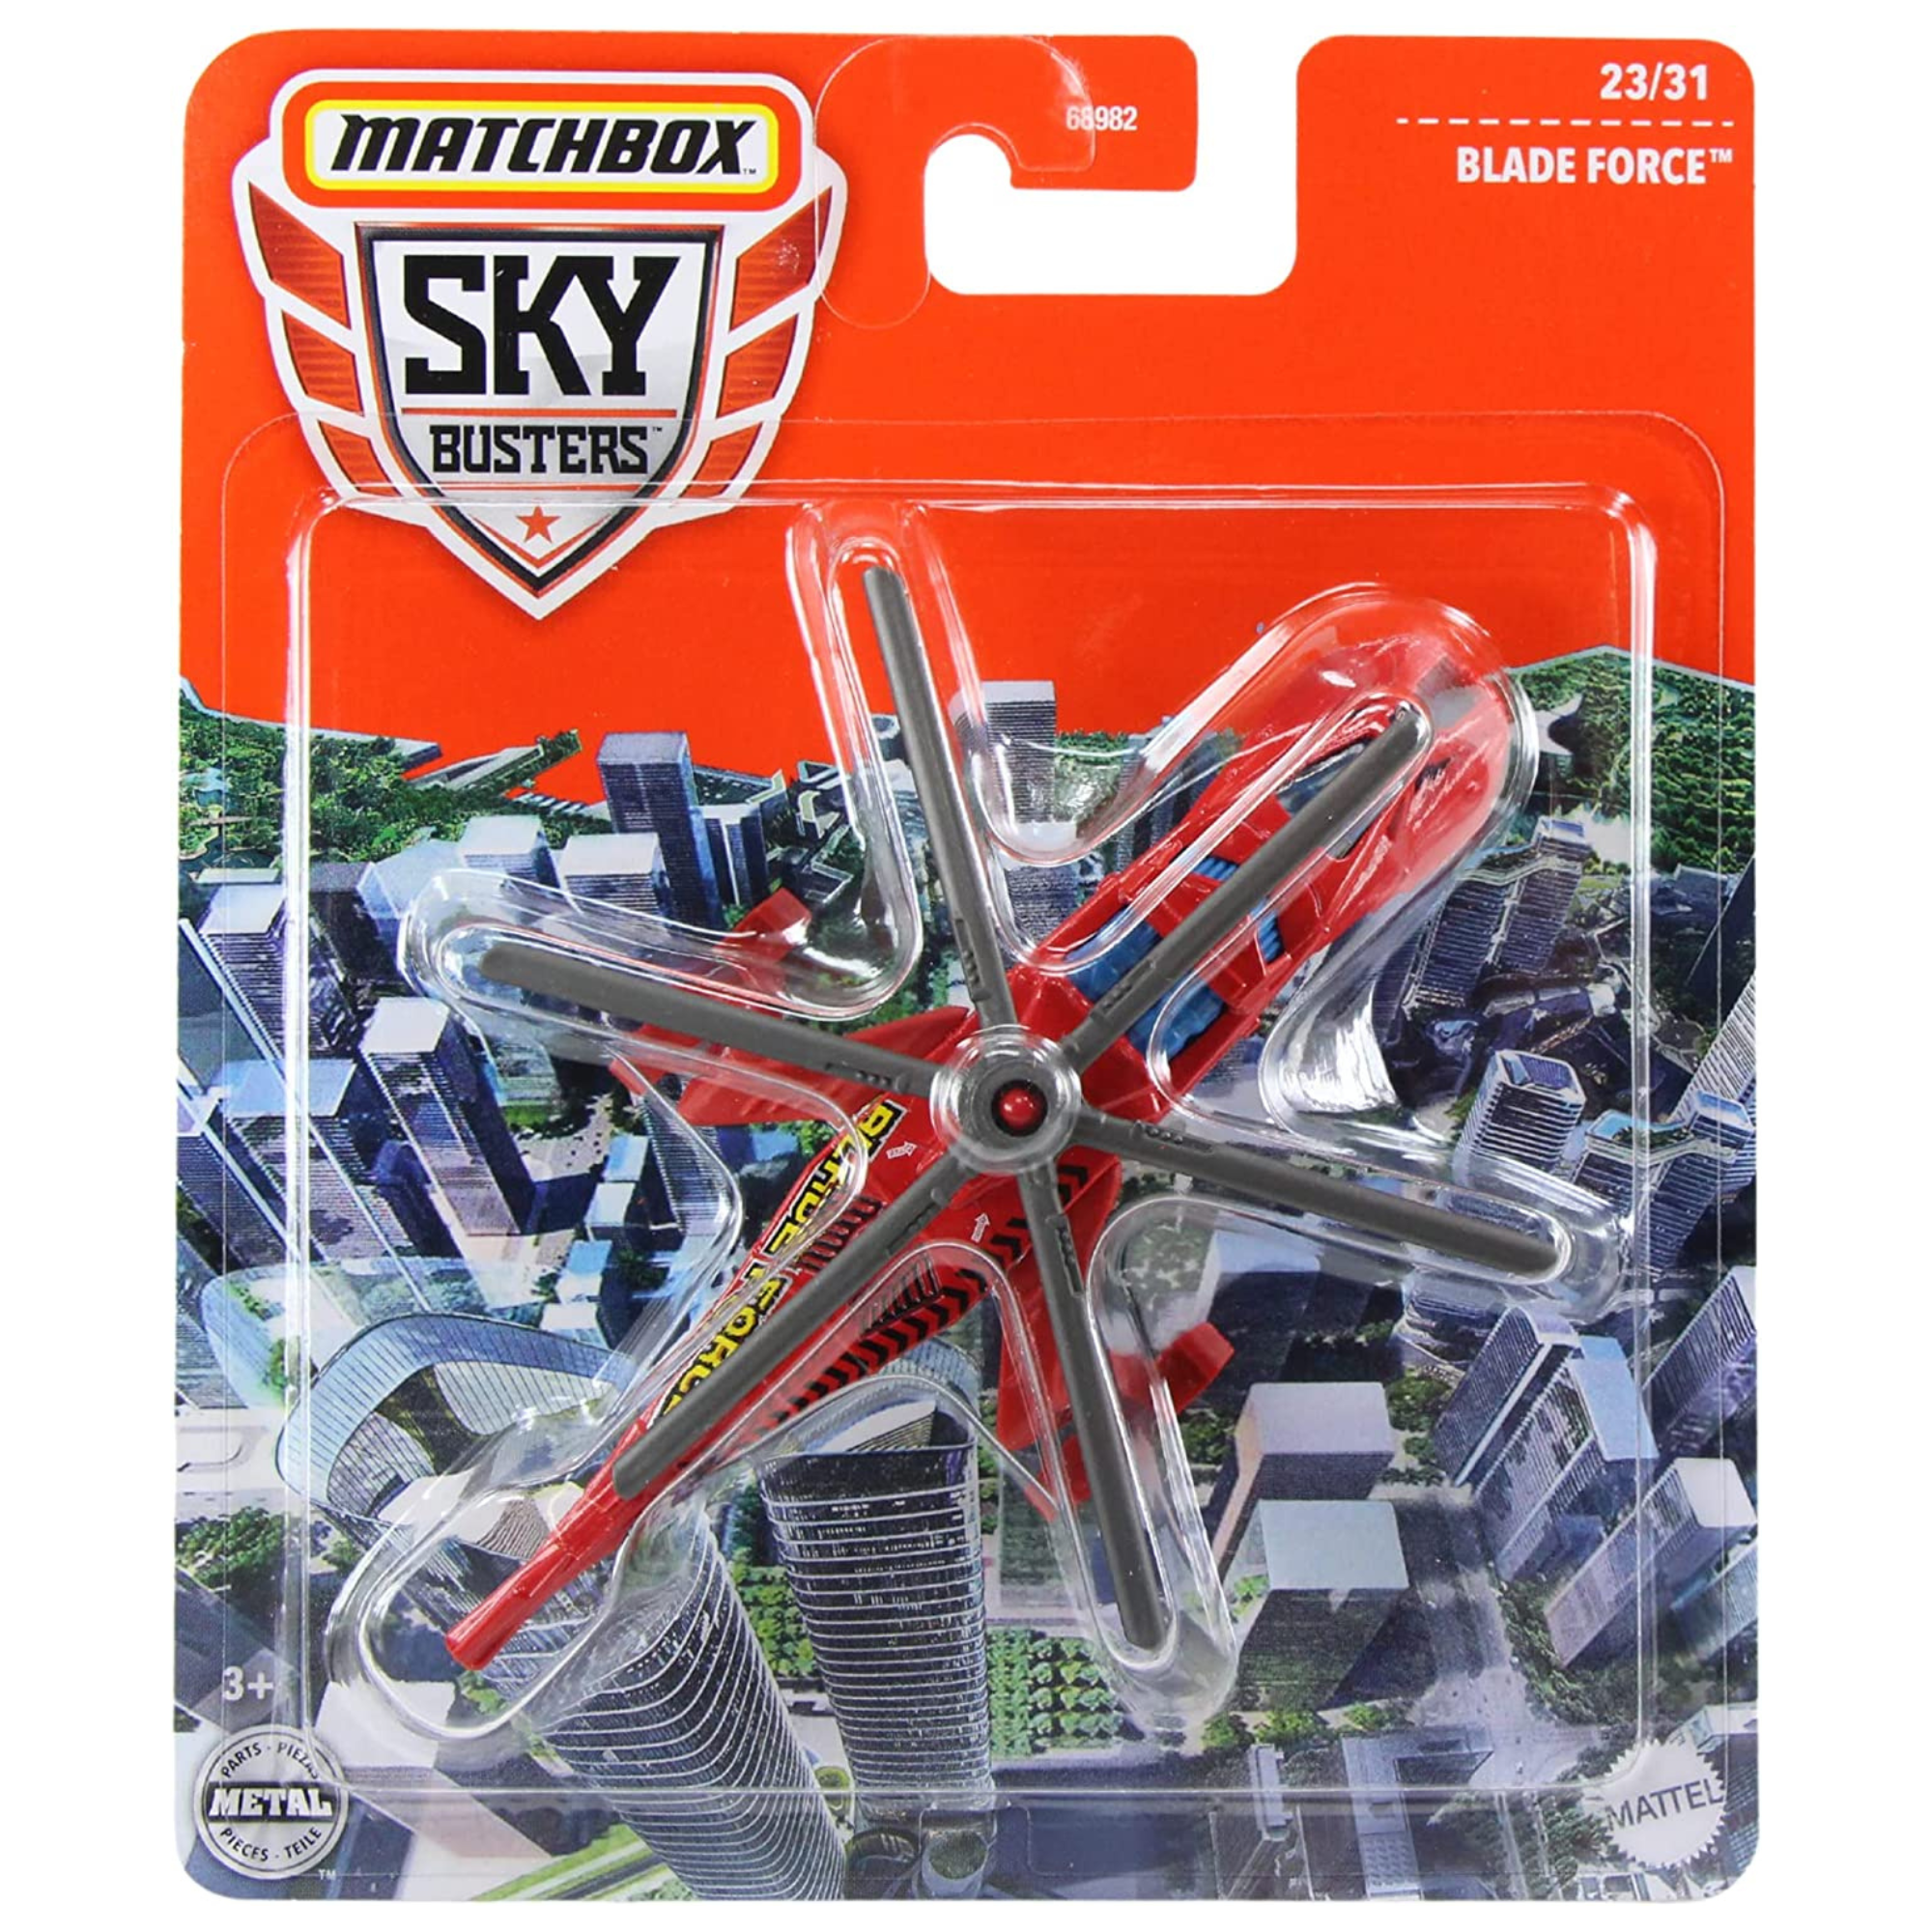 Matchbox - Blade Force Helicopter Sky Busters 1:64 Scale Diecast Plane 23/31 Red/Blue GWK66 - Toptoys2u